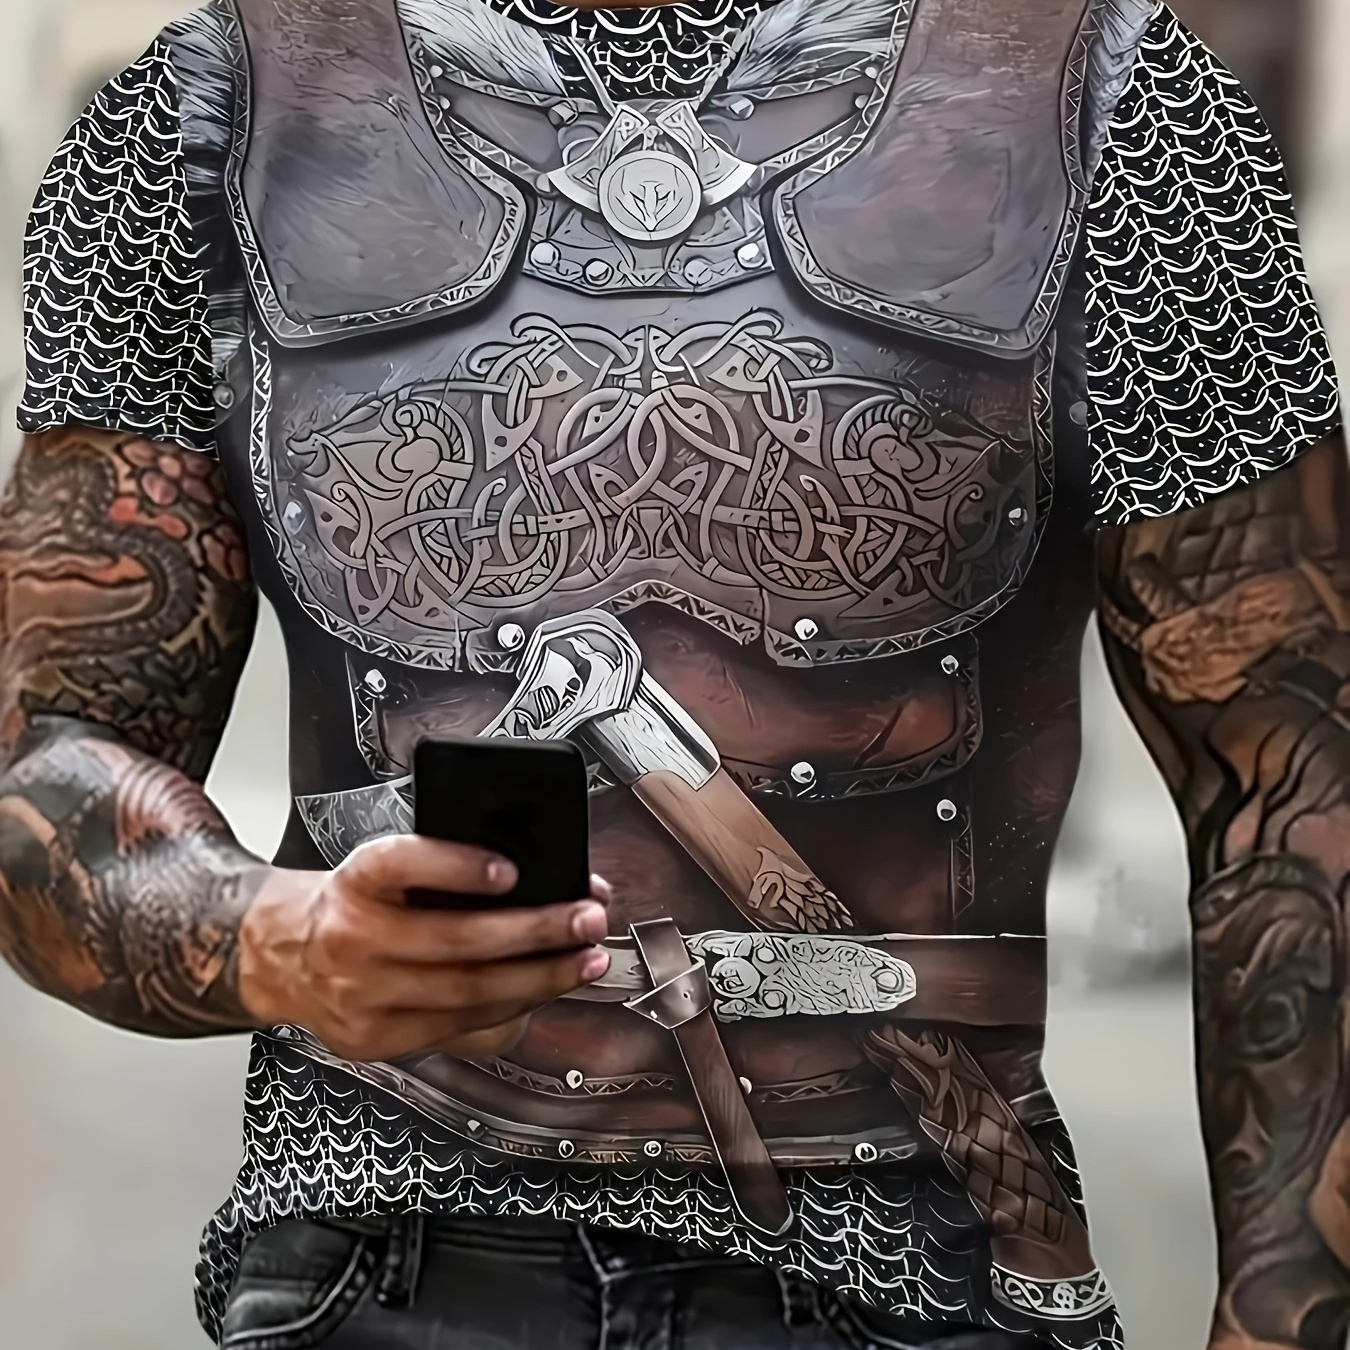 

Men's 3d Digital Ancient Leather Vest With Axe Pattern Print Crew Neck And Short Sleeve T-shirt For Summer Outdoors Wear, Novel Tops For Men